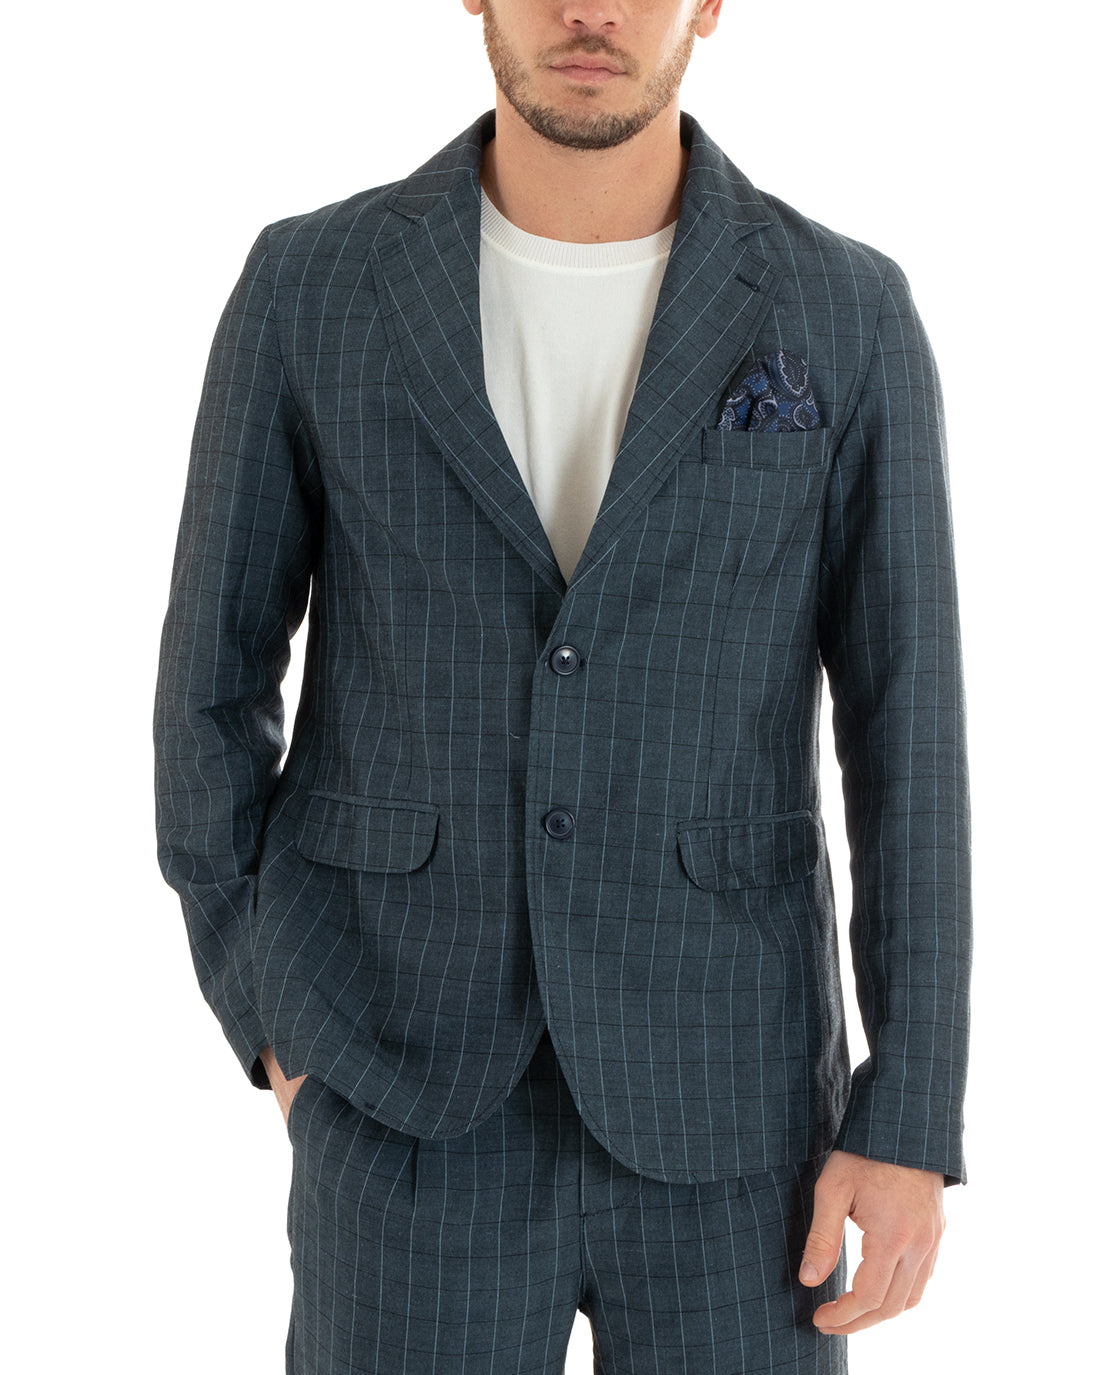 Single Breasted Men's Suit Blue Linen Check Tailored Jacket Trousers Elegant Casual GIOSAL-OU2289A